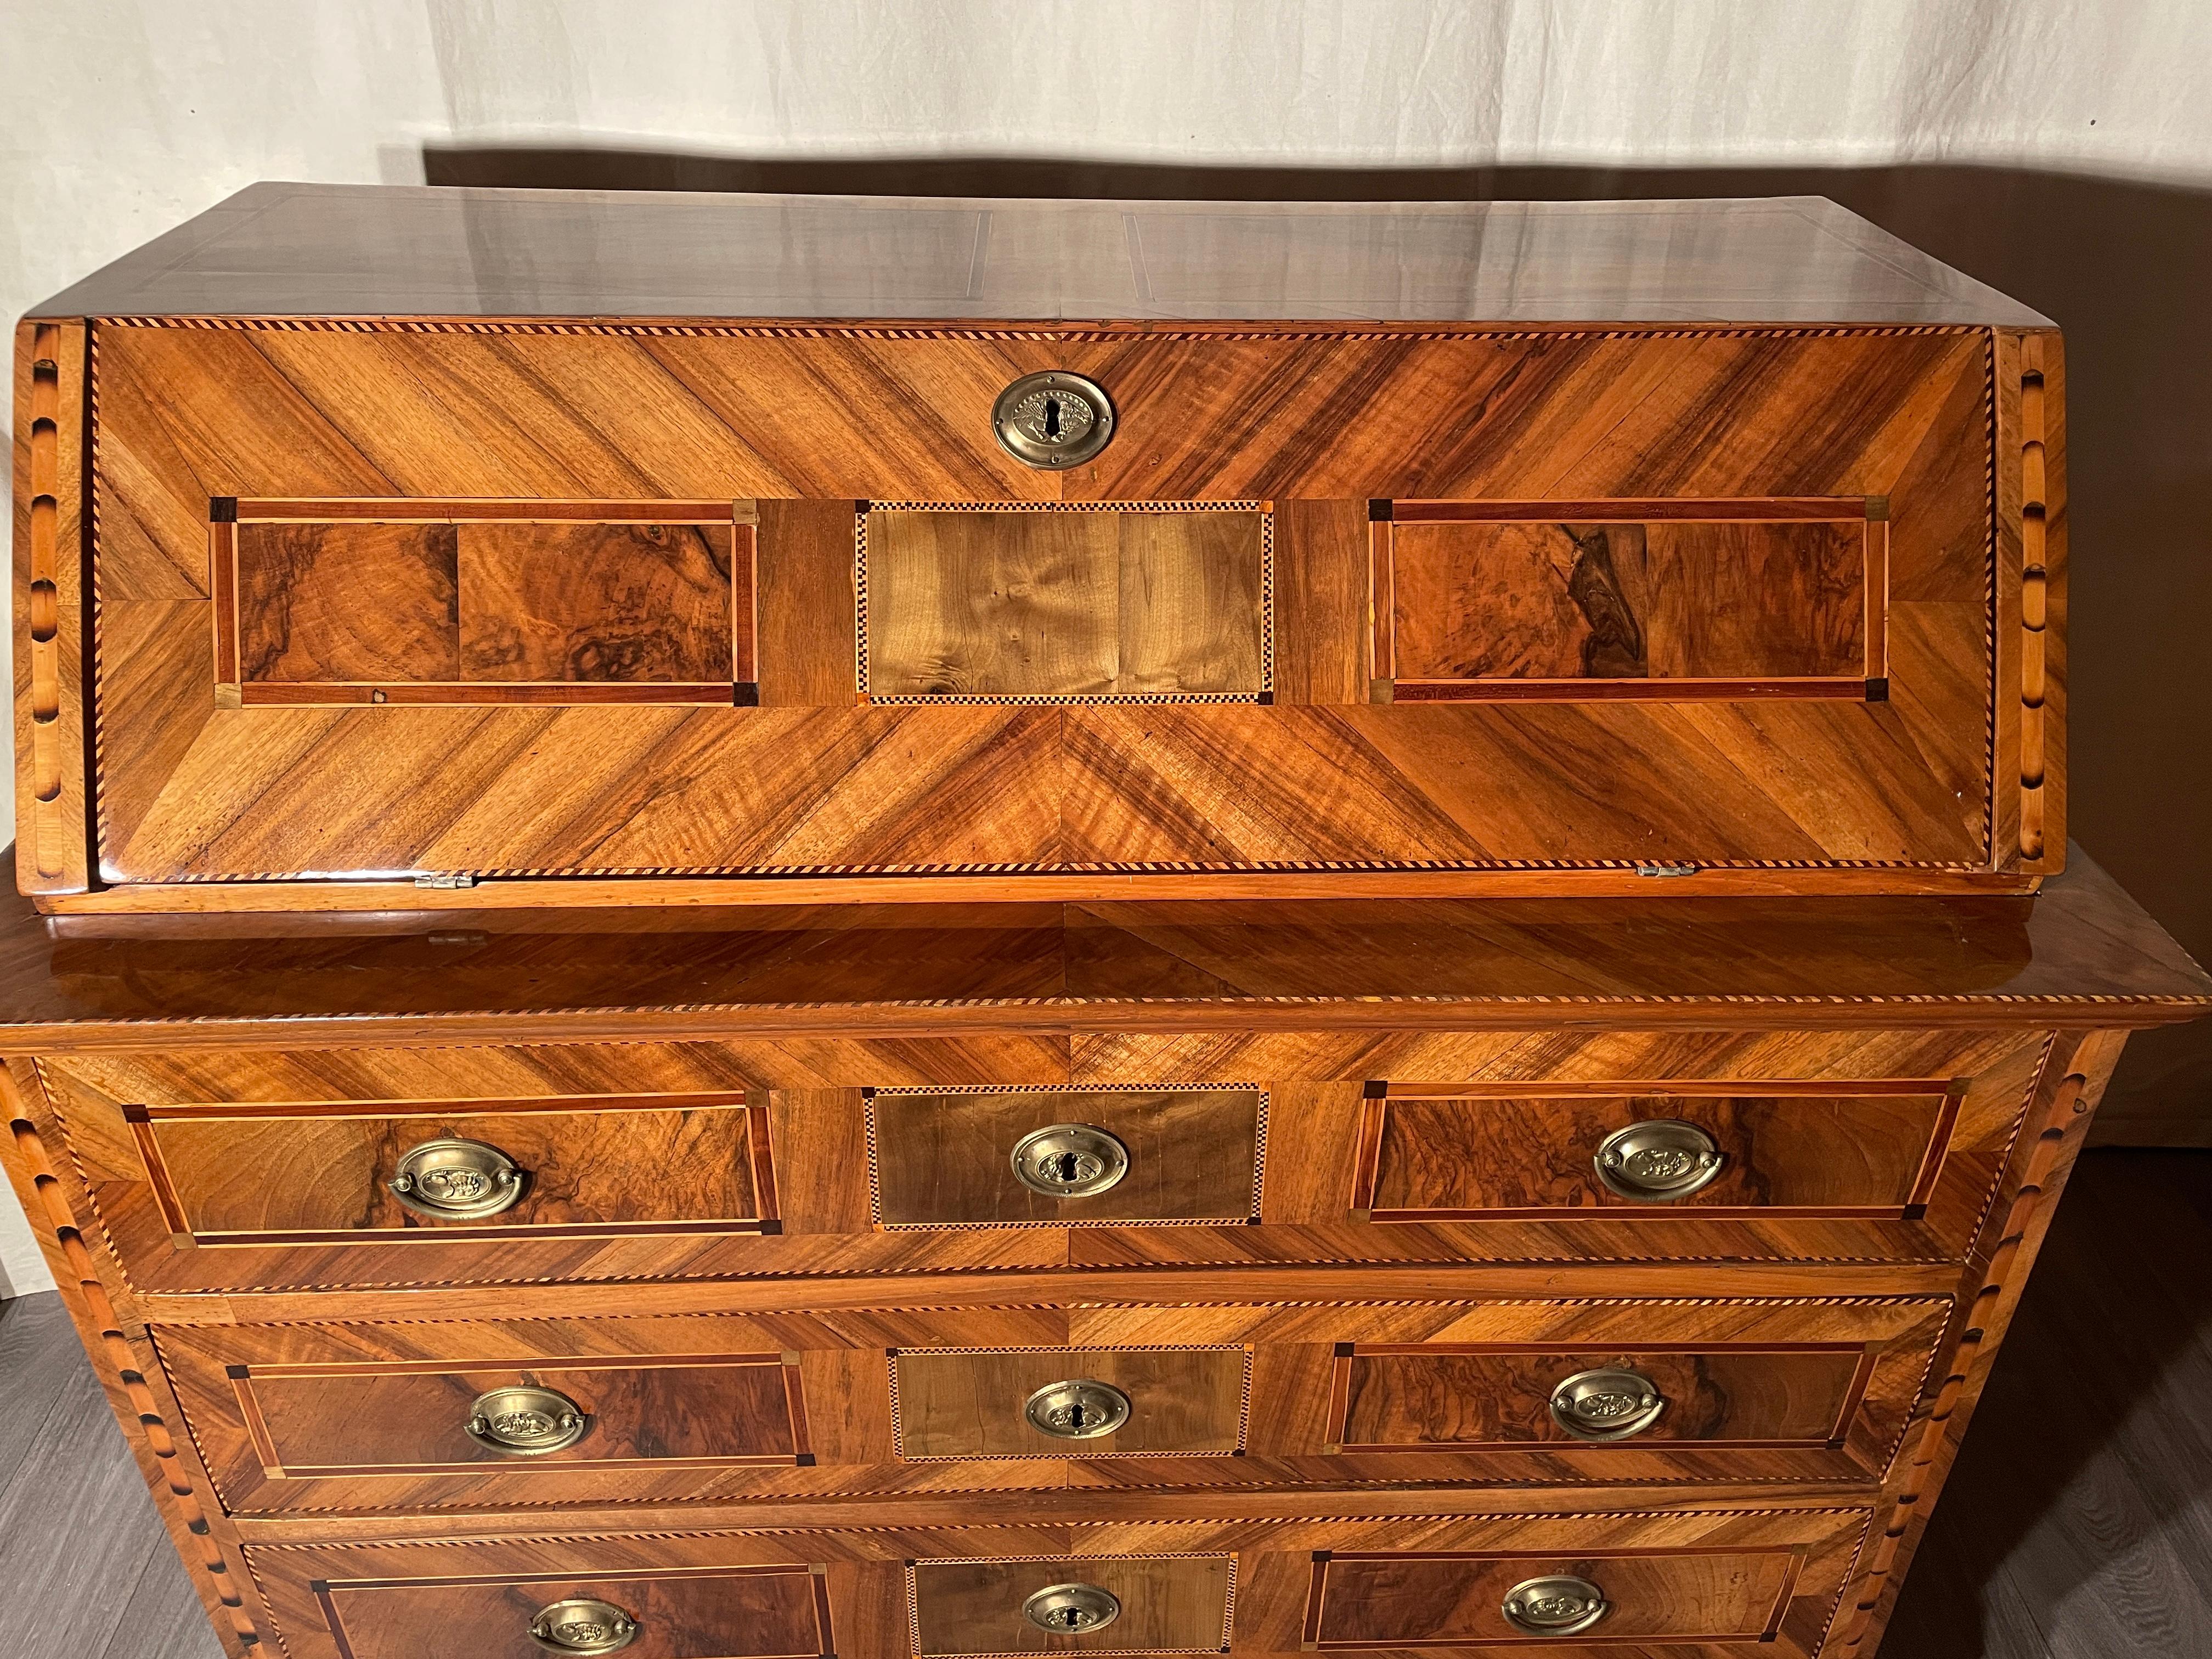 This original Louis XVI Secretary Desk dates back to 1780 and comes form the southern part of Germany. It is a real beauty! The lower part has two large drawers. The upper part has a sloping writing flap, behind it are 5 drawers and one open